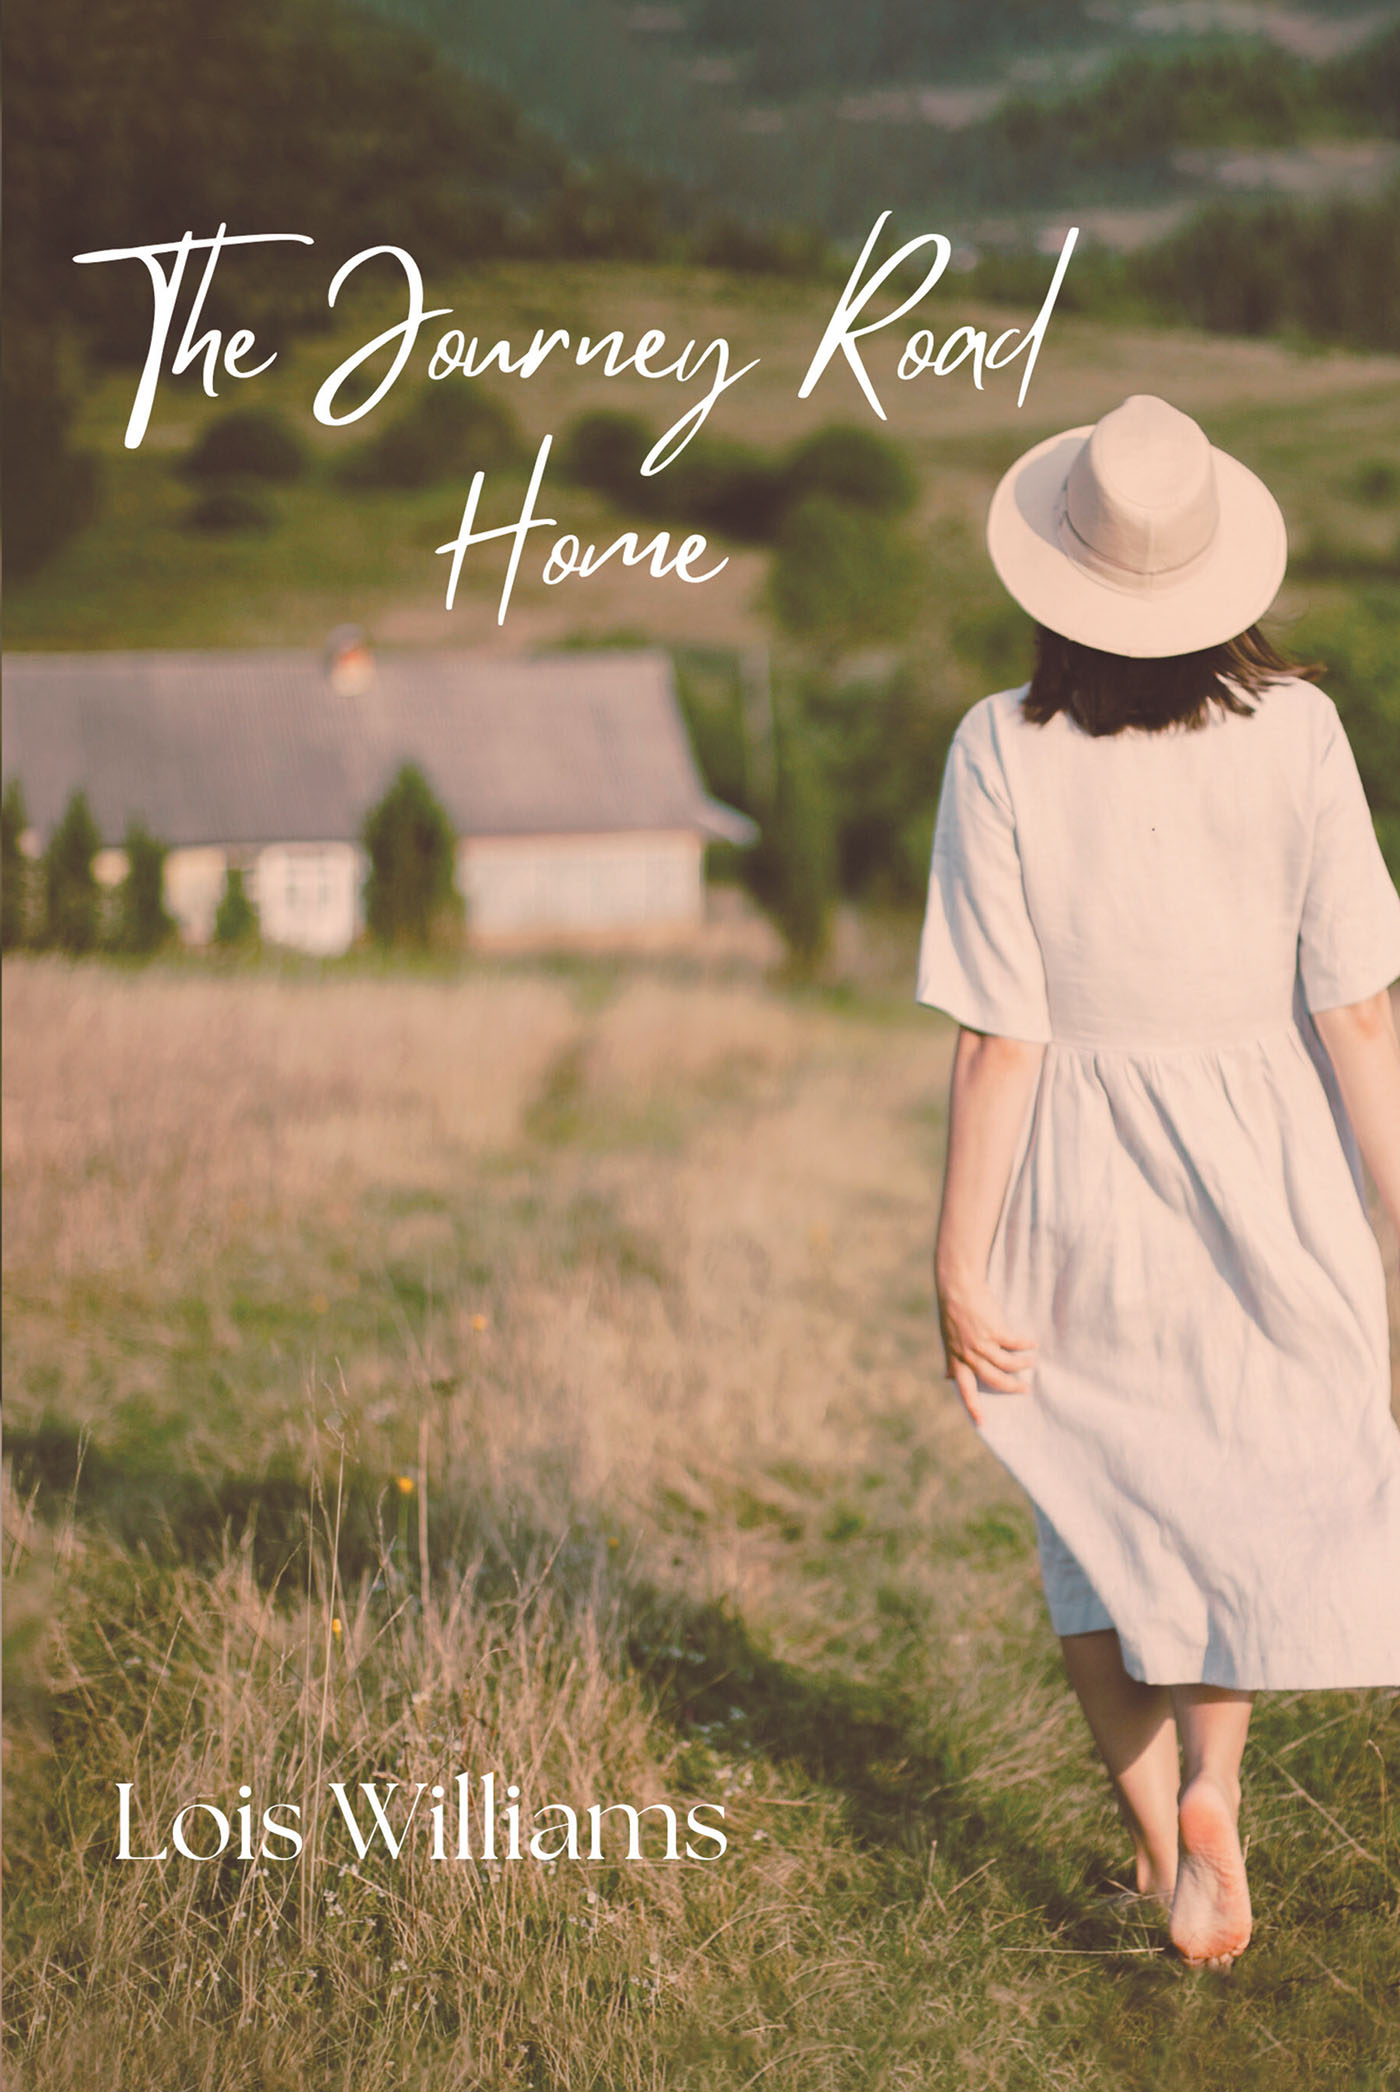 Author Lois Williams’s New Book, "The Journey Road Home," Follows a Preacher's Daughter Who Struggles to Appease Both God and Those Around Her in Her Life's Choices